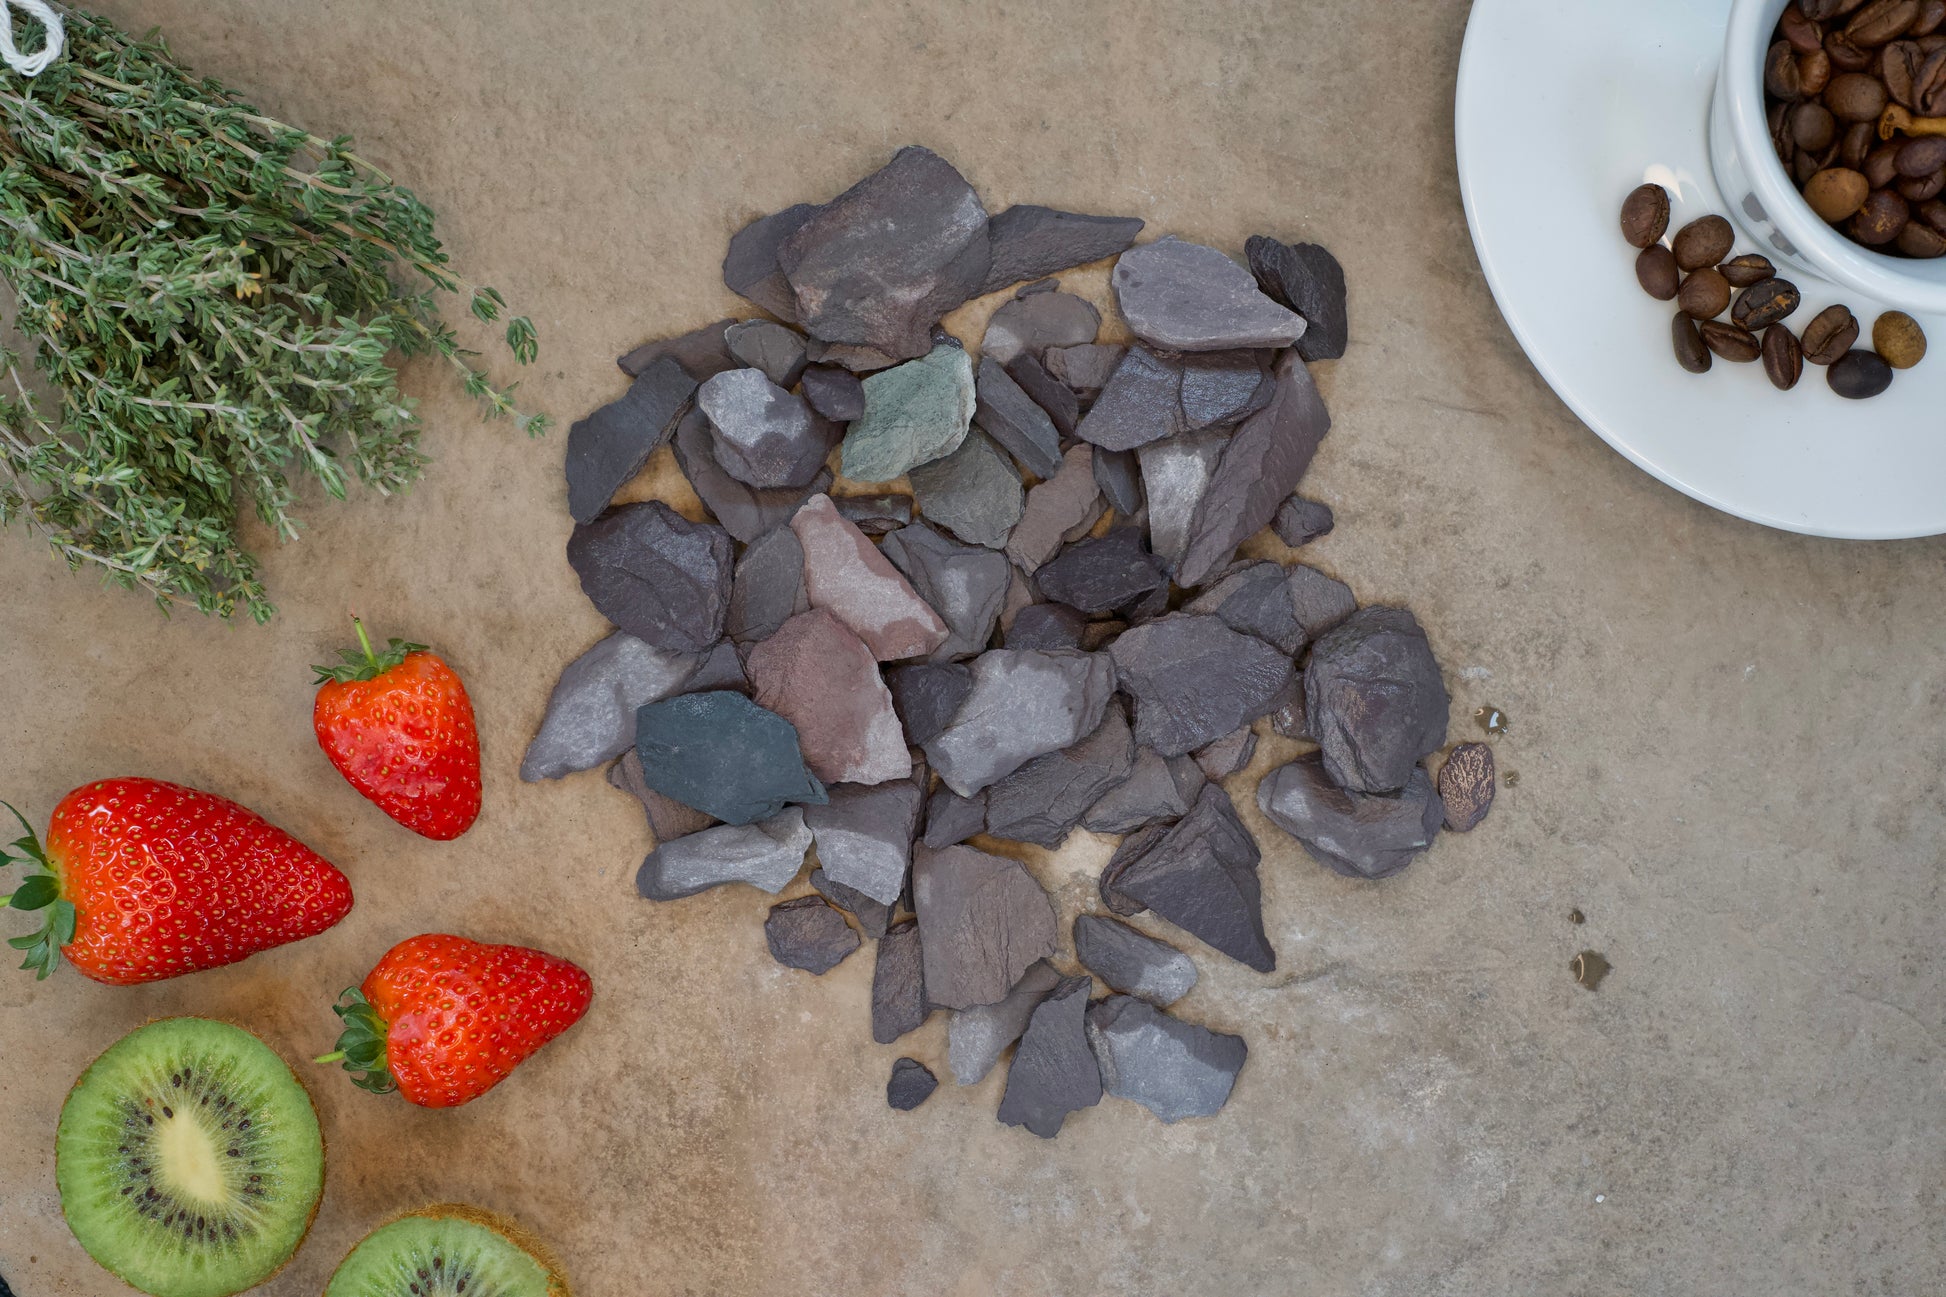 A display of various items: a cluster of fresh thyme, a few ripe strawberries, sliced kiwis, a cluster of Brisks 20mm Plum Slate Chippings, and a white plate with coffee beans. All items are arranged on a textured, beige surface.